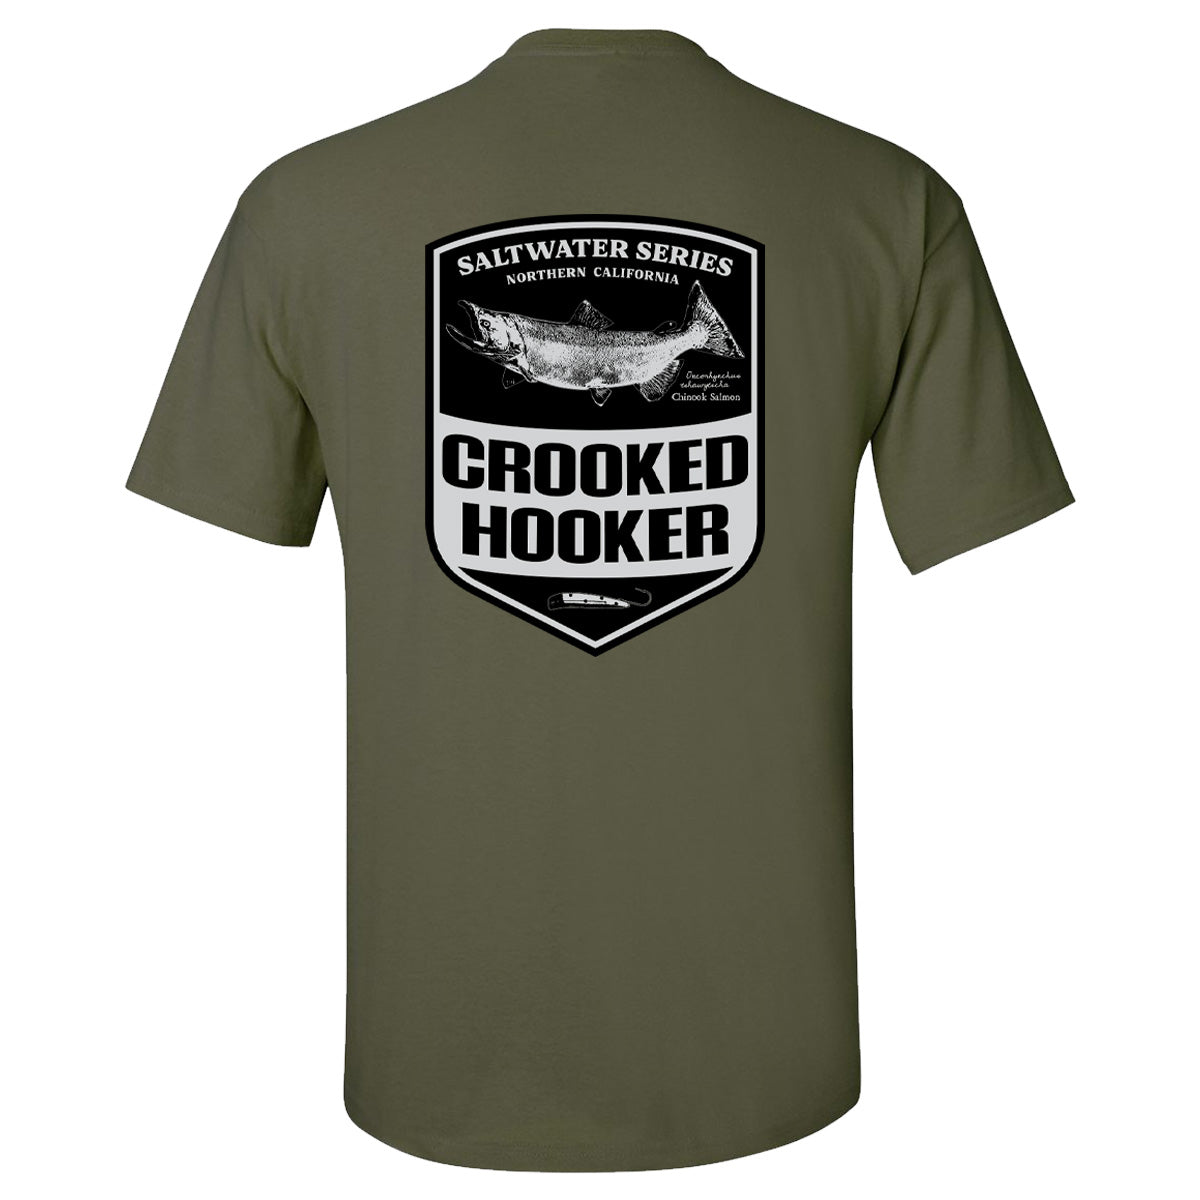 Salmon Badge Premium T-Shirt from Crooked Hooker